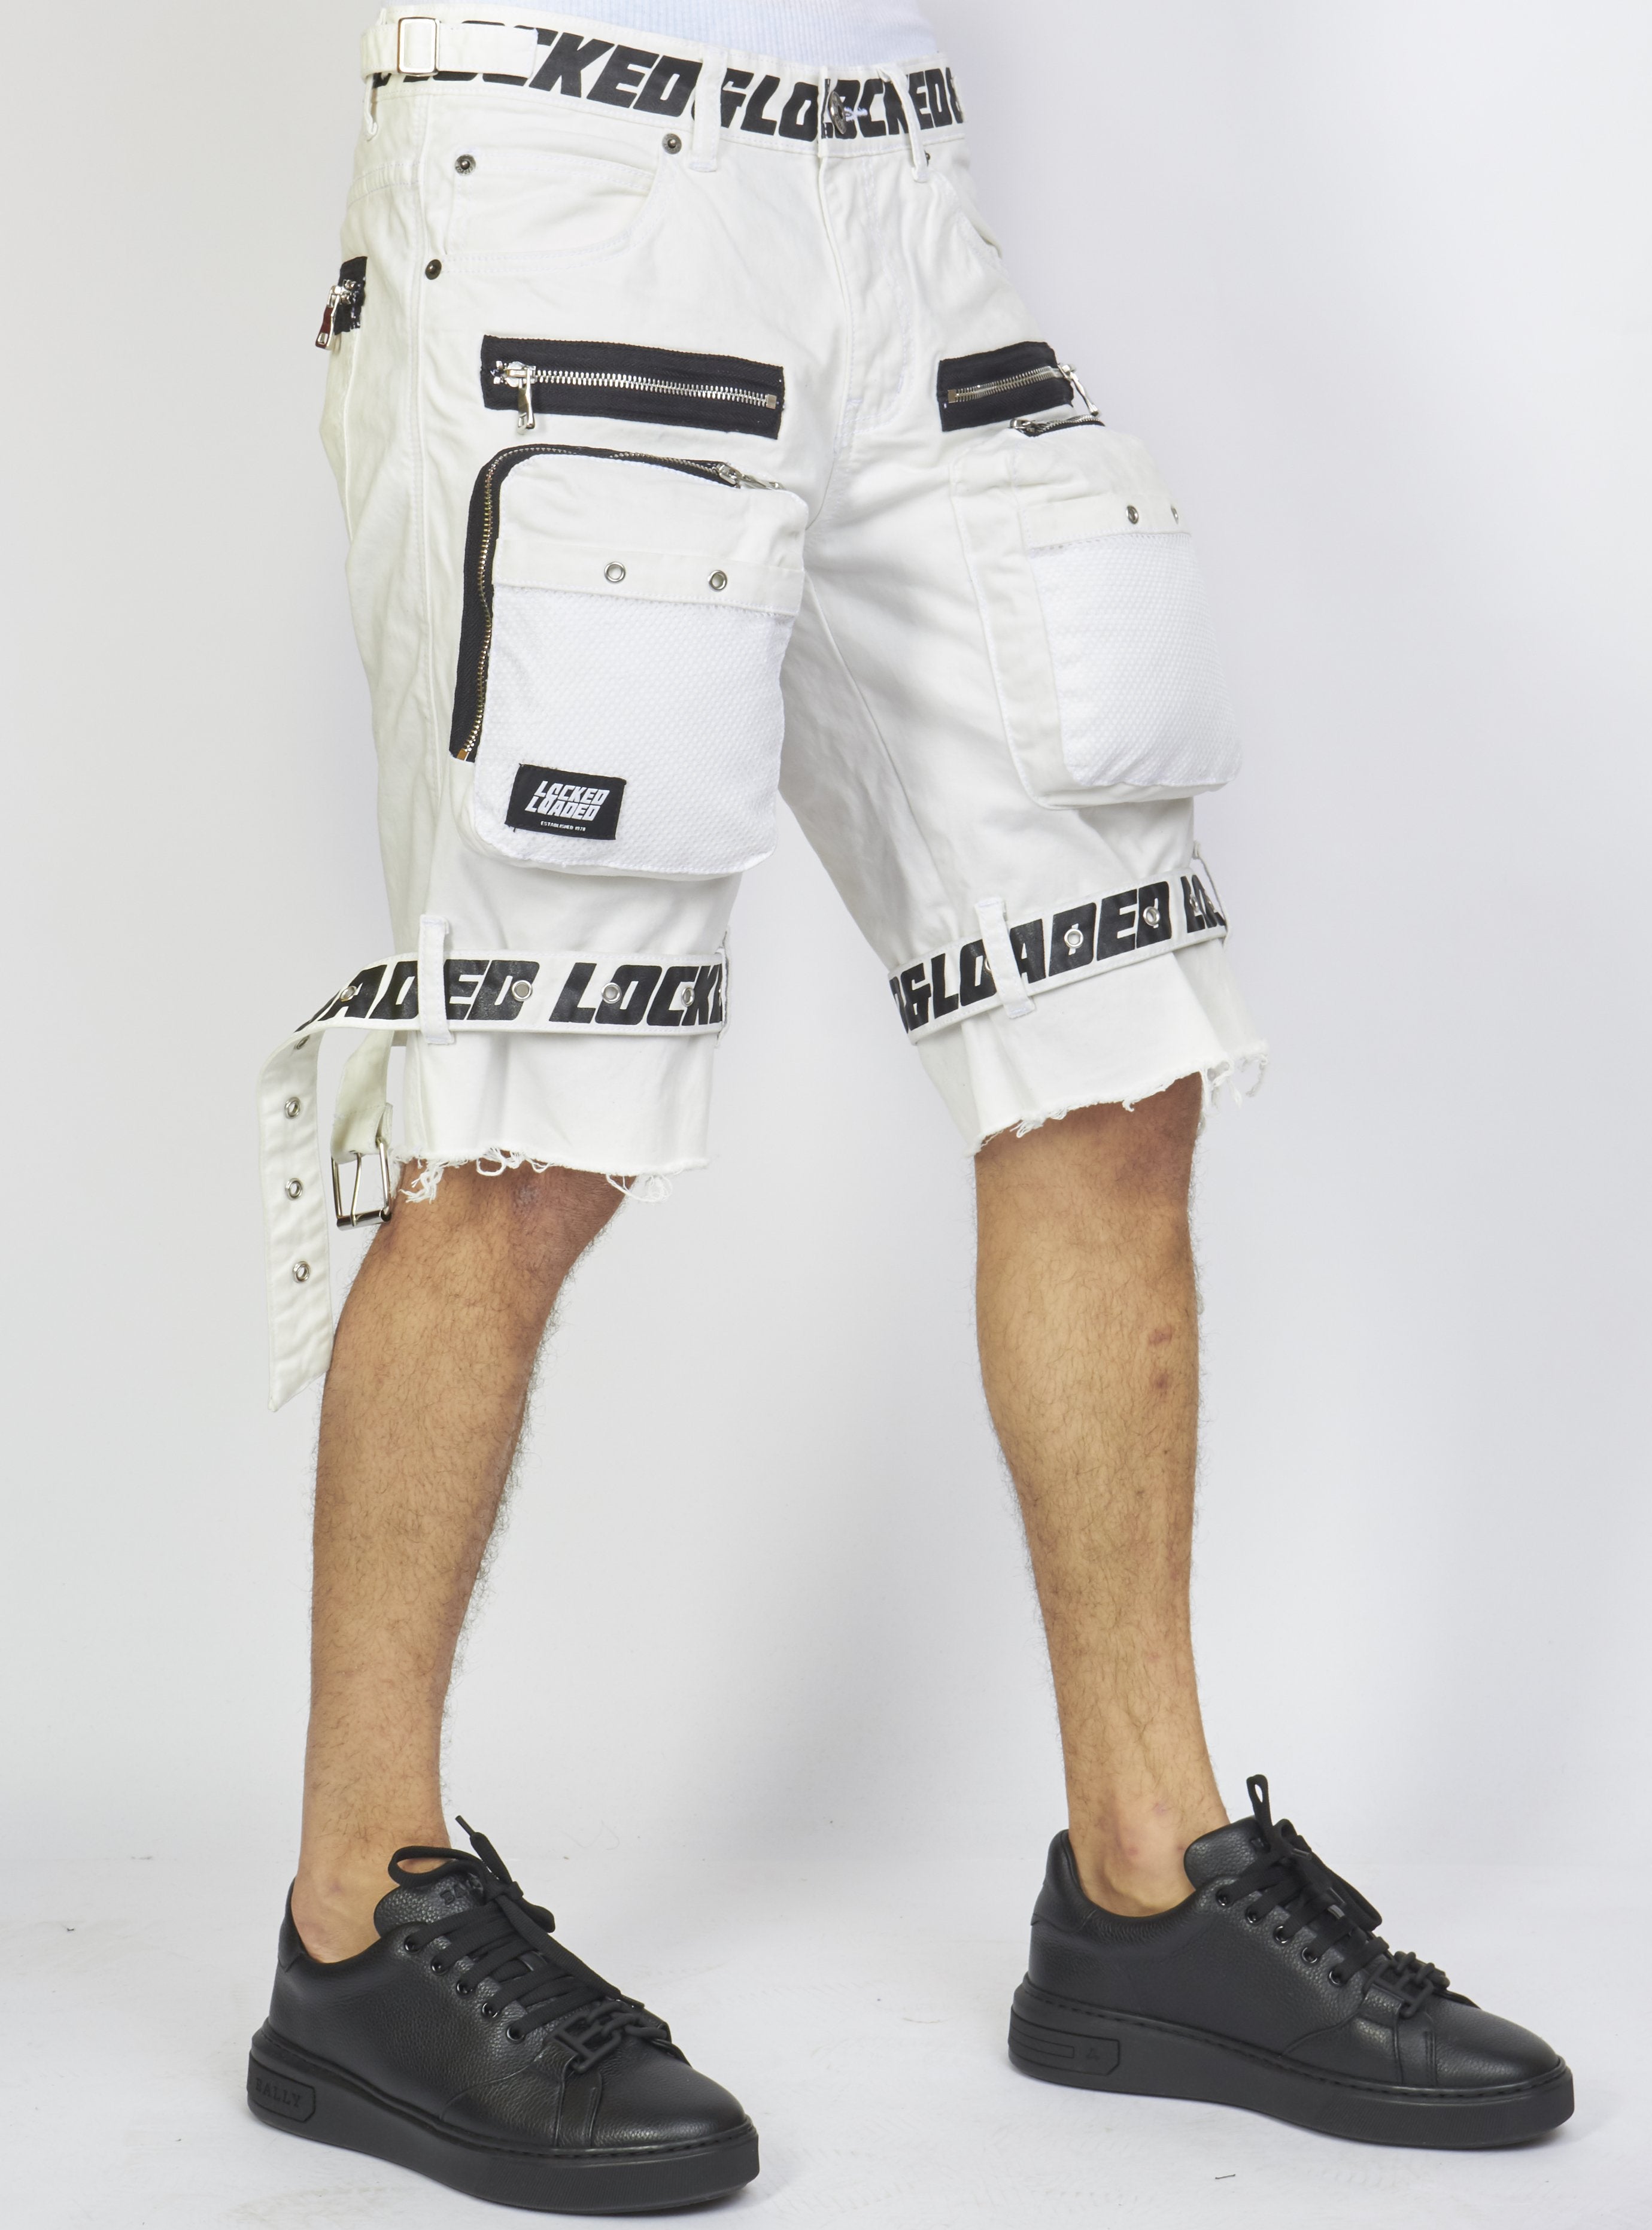 Locked & Loaded Shorts - White Cotton Twill - Featuring 3D Cargo Pockets - White / Black Print - LDS421102